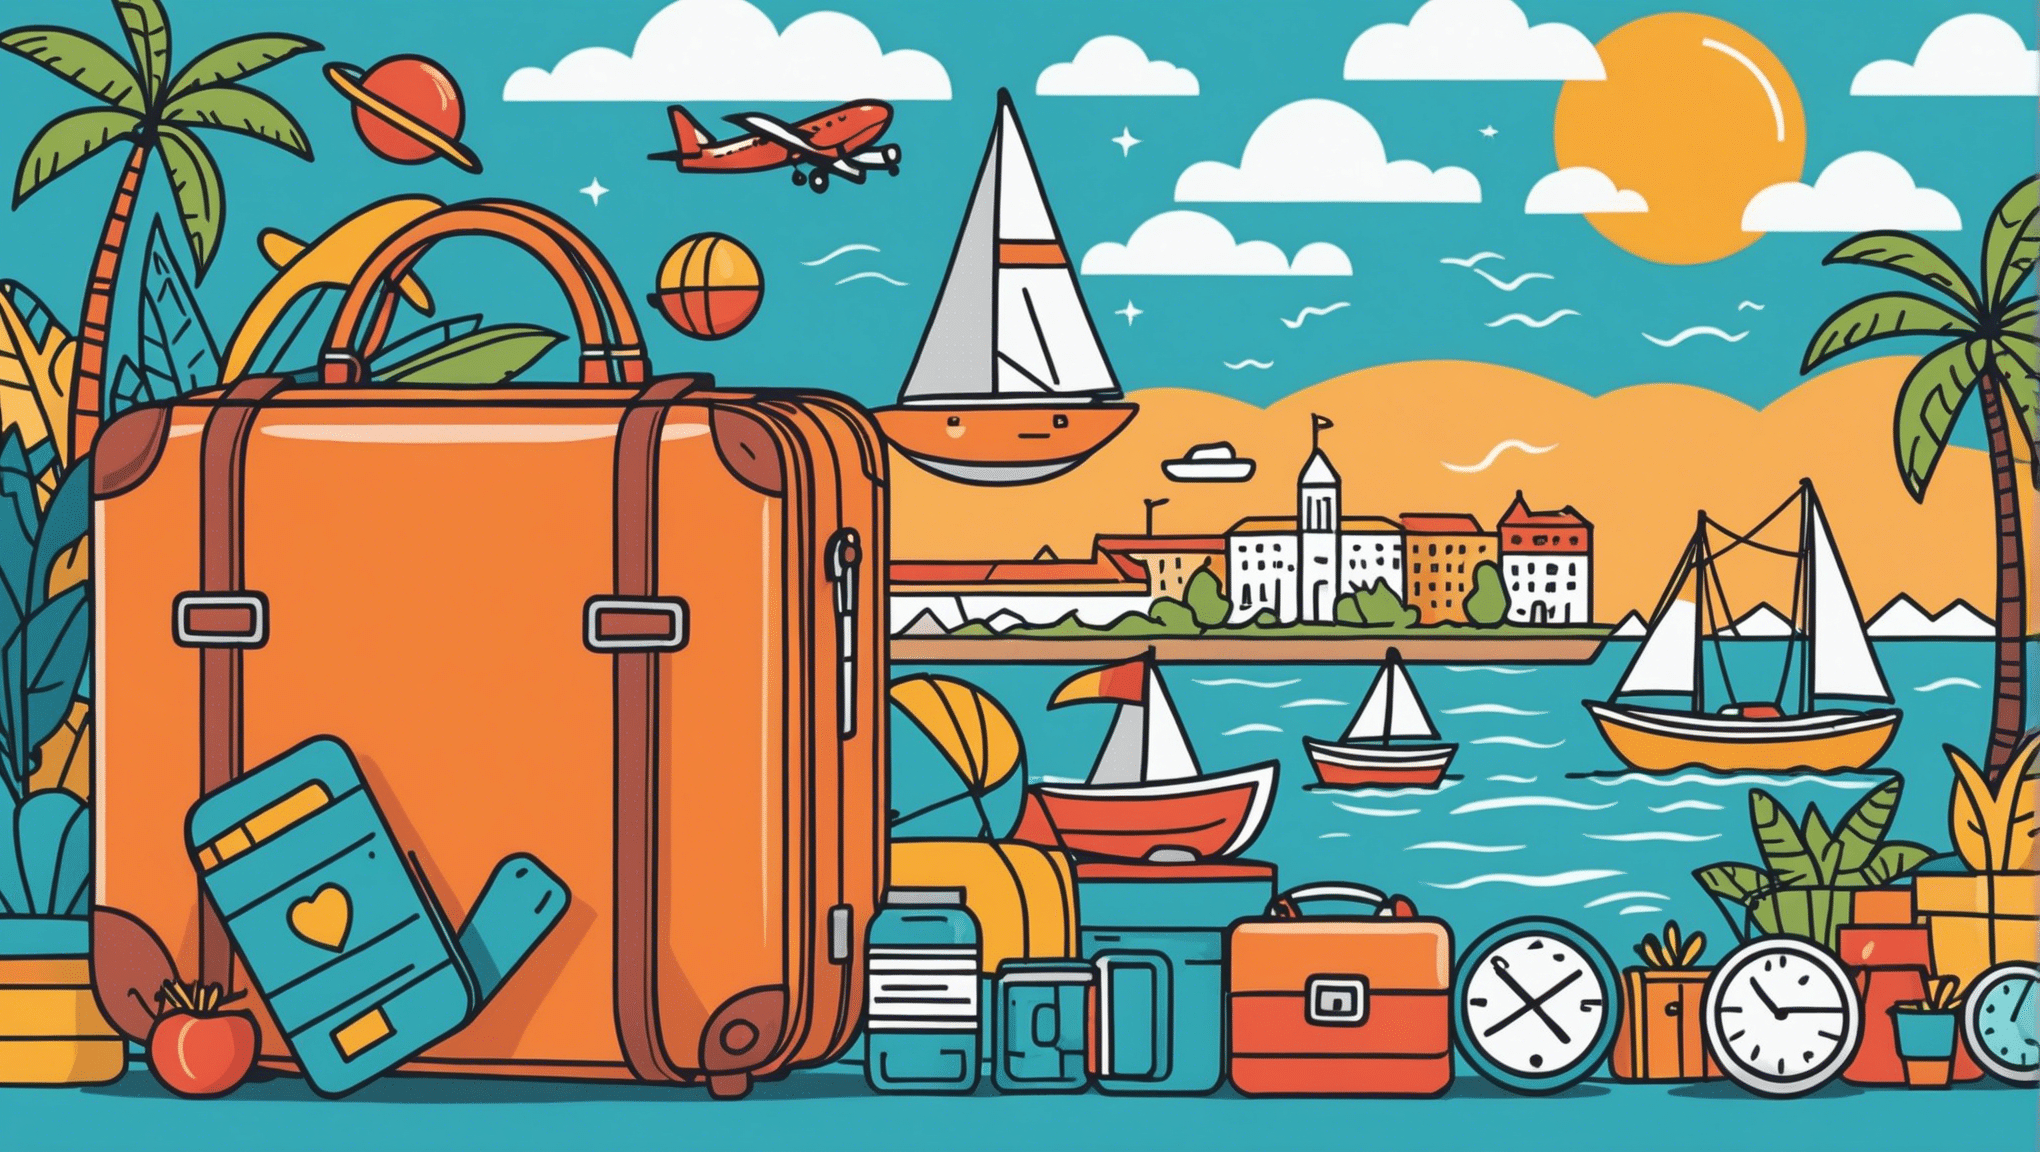 discover how to optimize your travel budget to get the most out of your money while traveling.